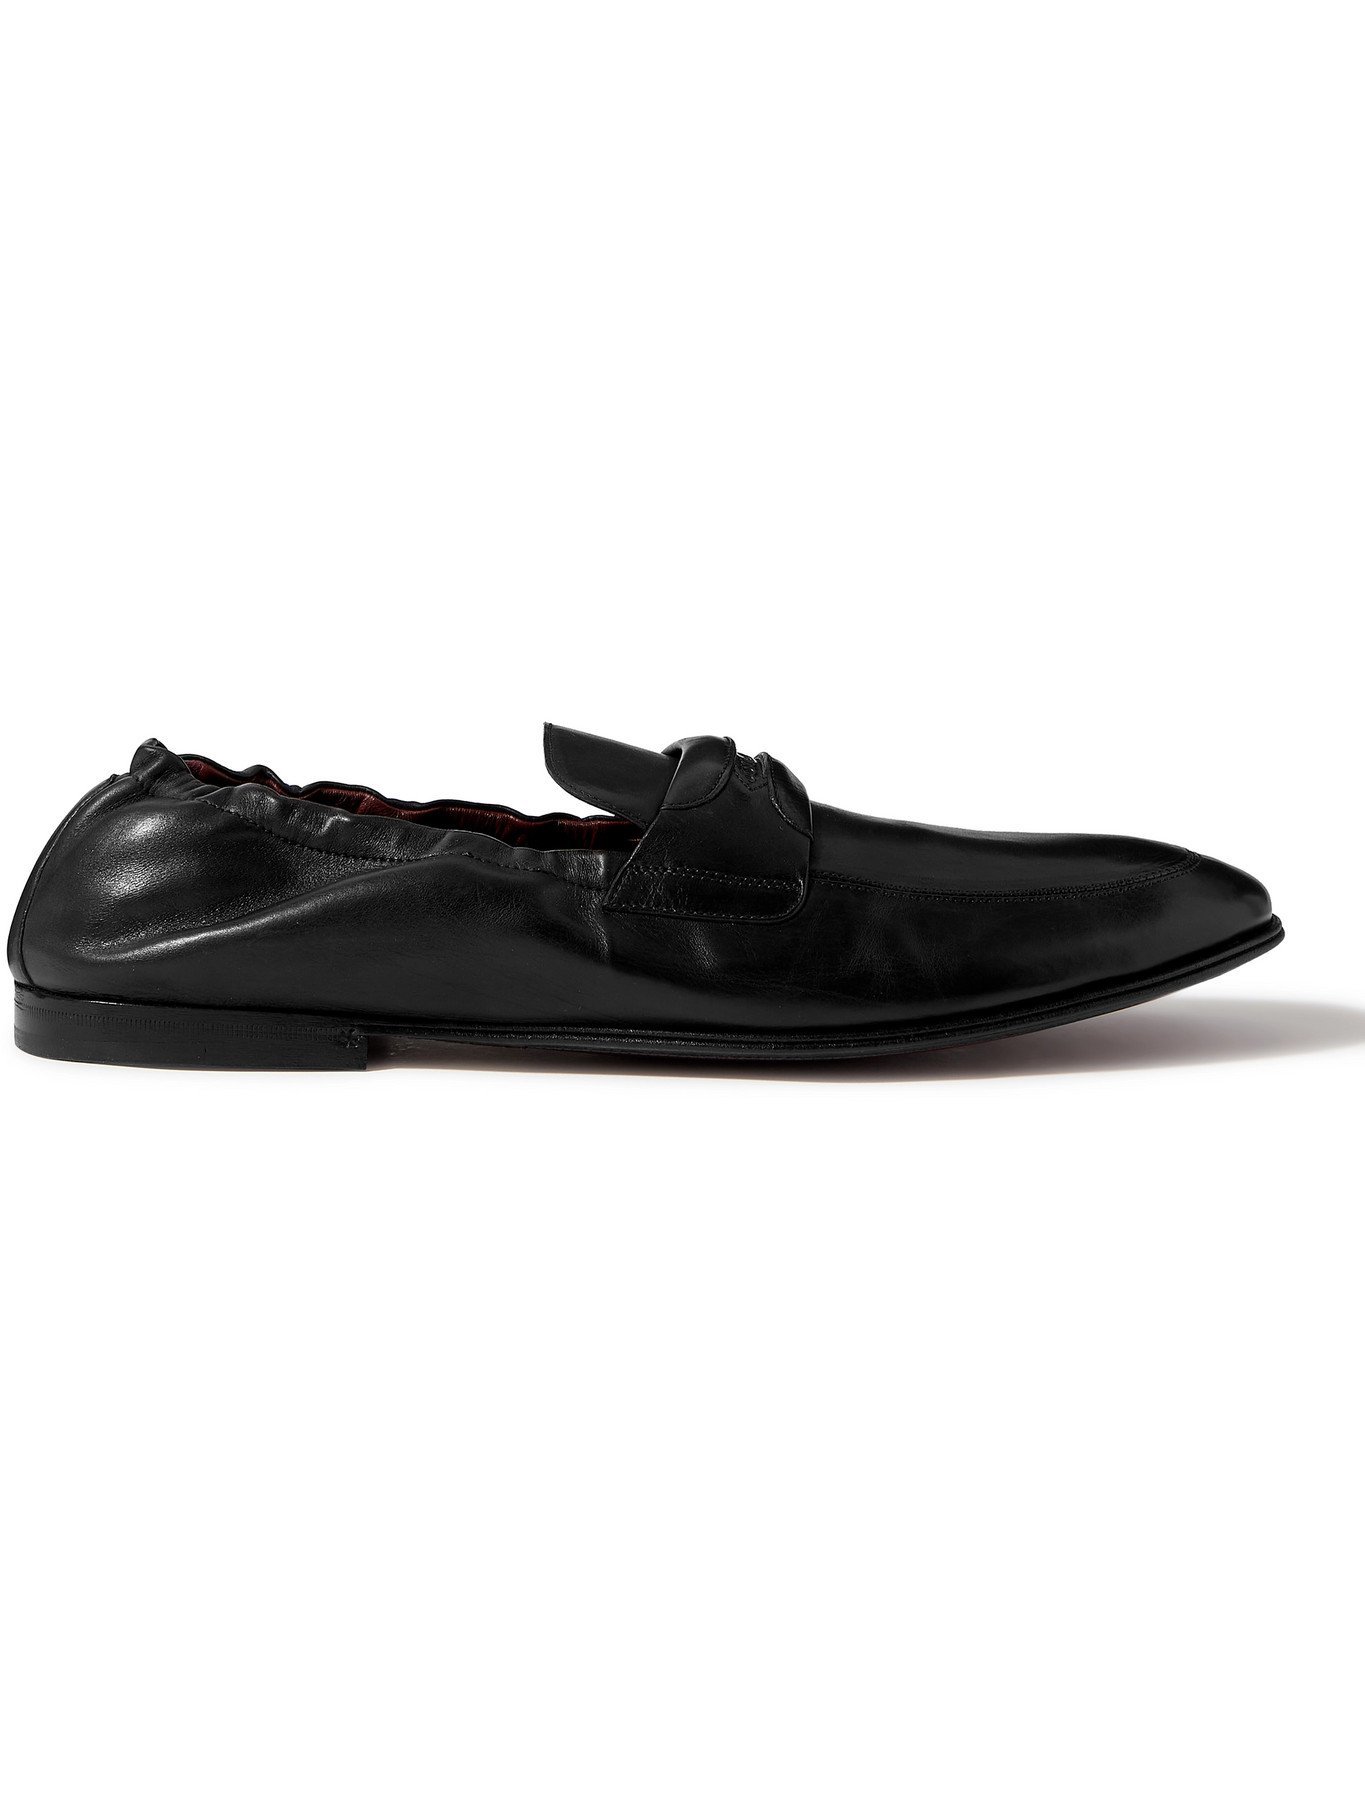 DOLCE & GABBANA - Ariosto Logo-Detailed Leather Loafers - Black Dolce ...